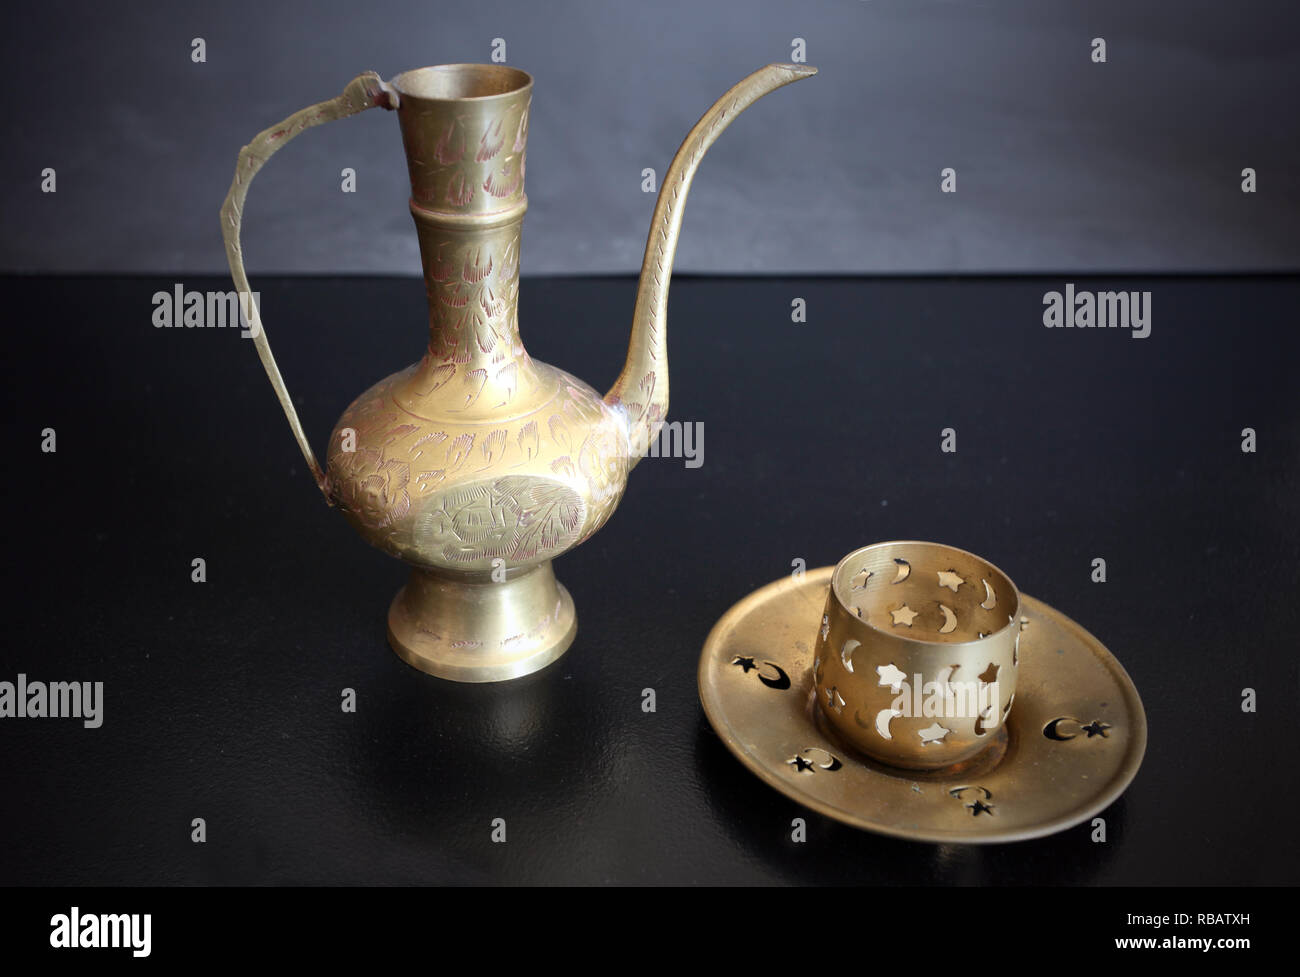 Copper articles, handmade. Ancient metal tank for liquids and a candlestick. Still life. Stock Photo